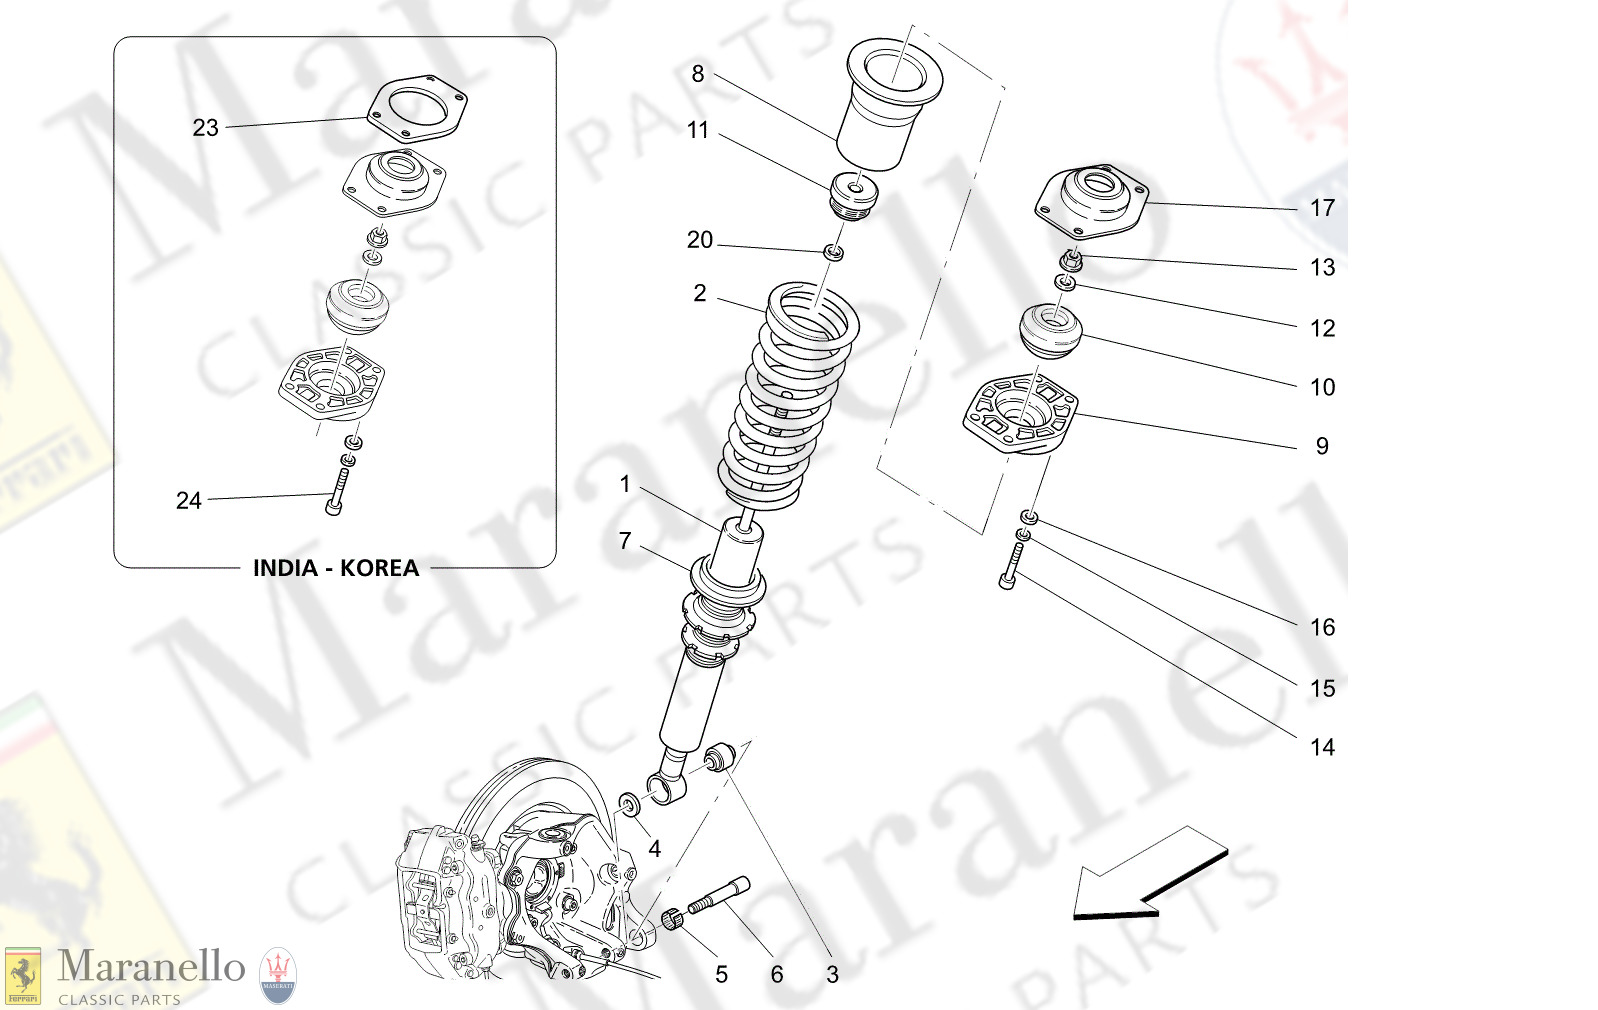 06.21 - 1 - 0621 - 1 Rear Shock Absorber Devices